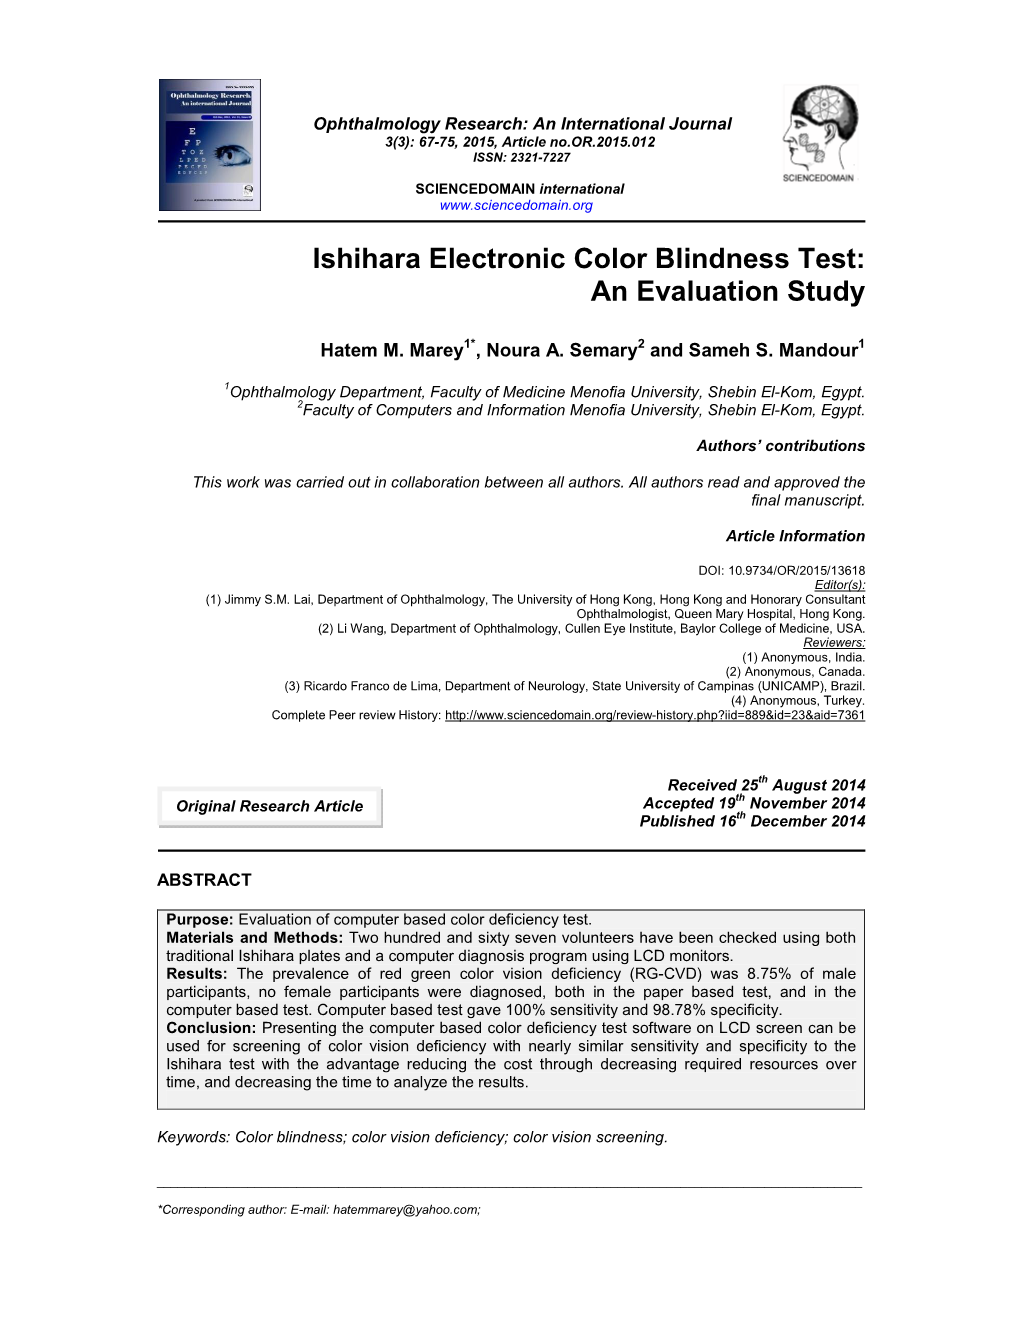 Ishihara Electronic Color Blindness Test: an Evaluation Study